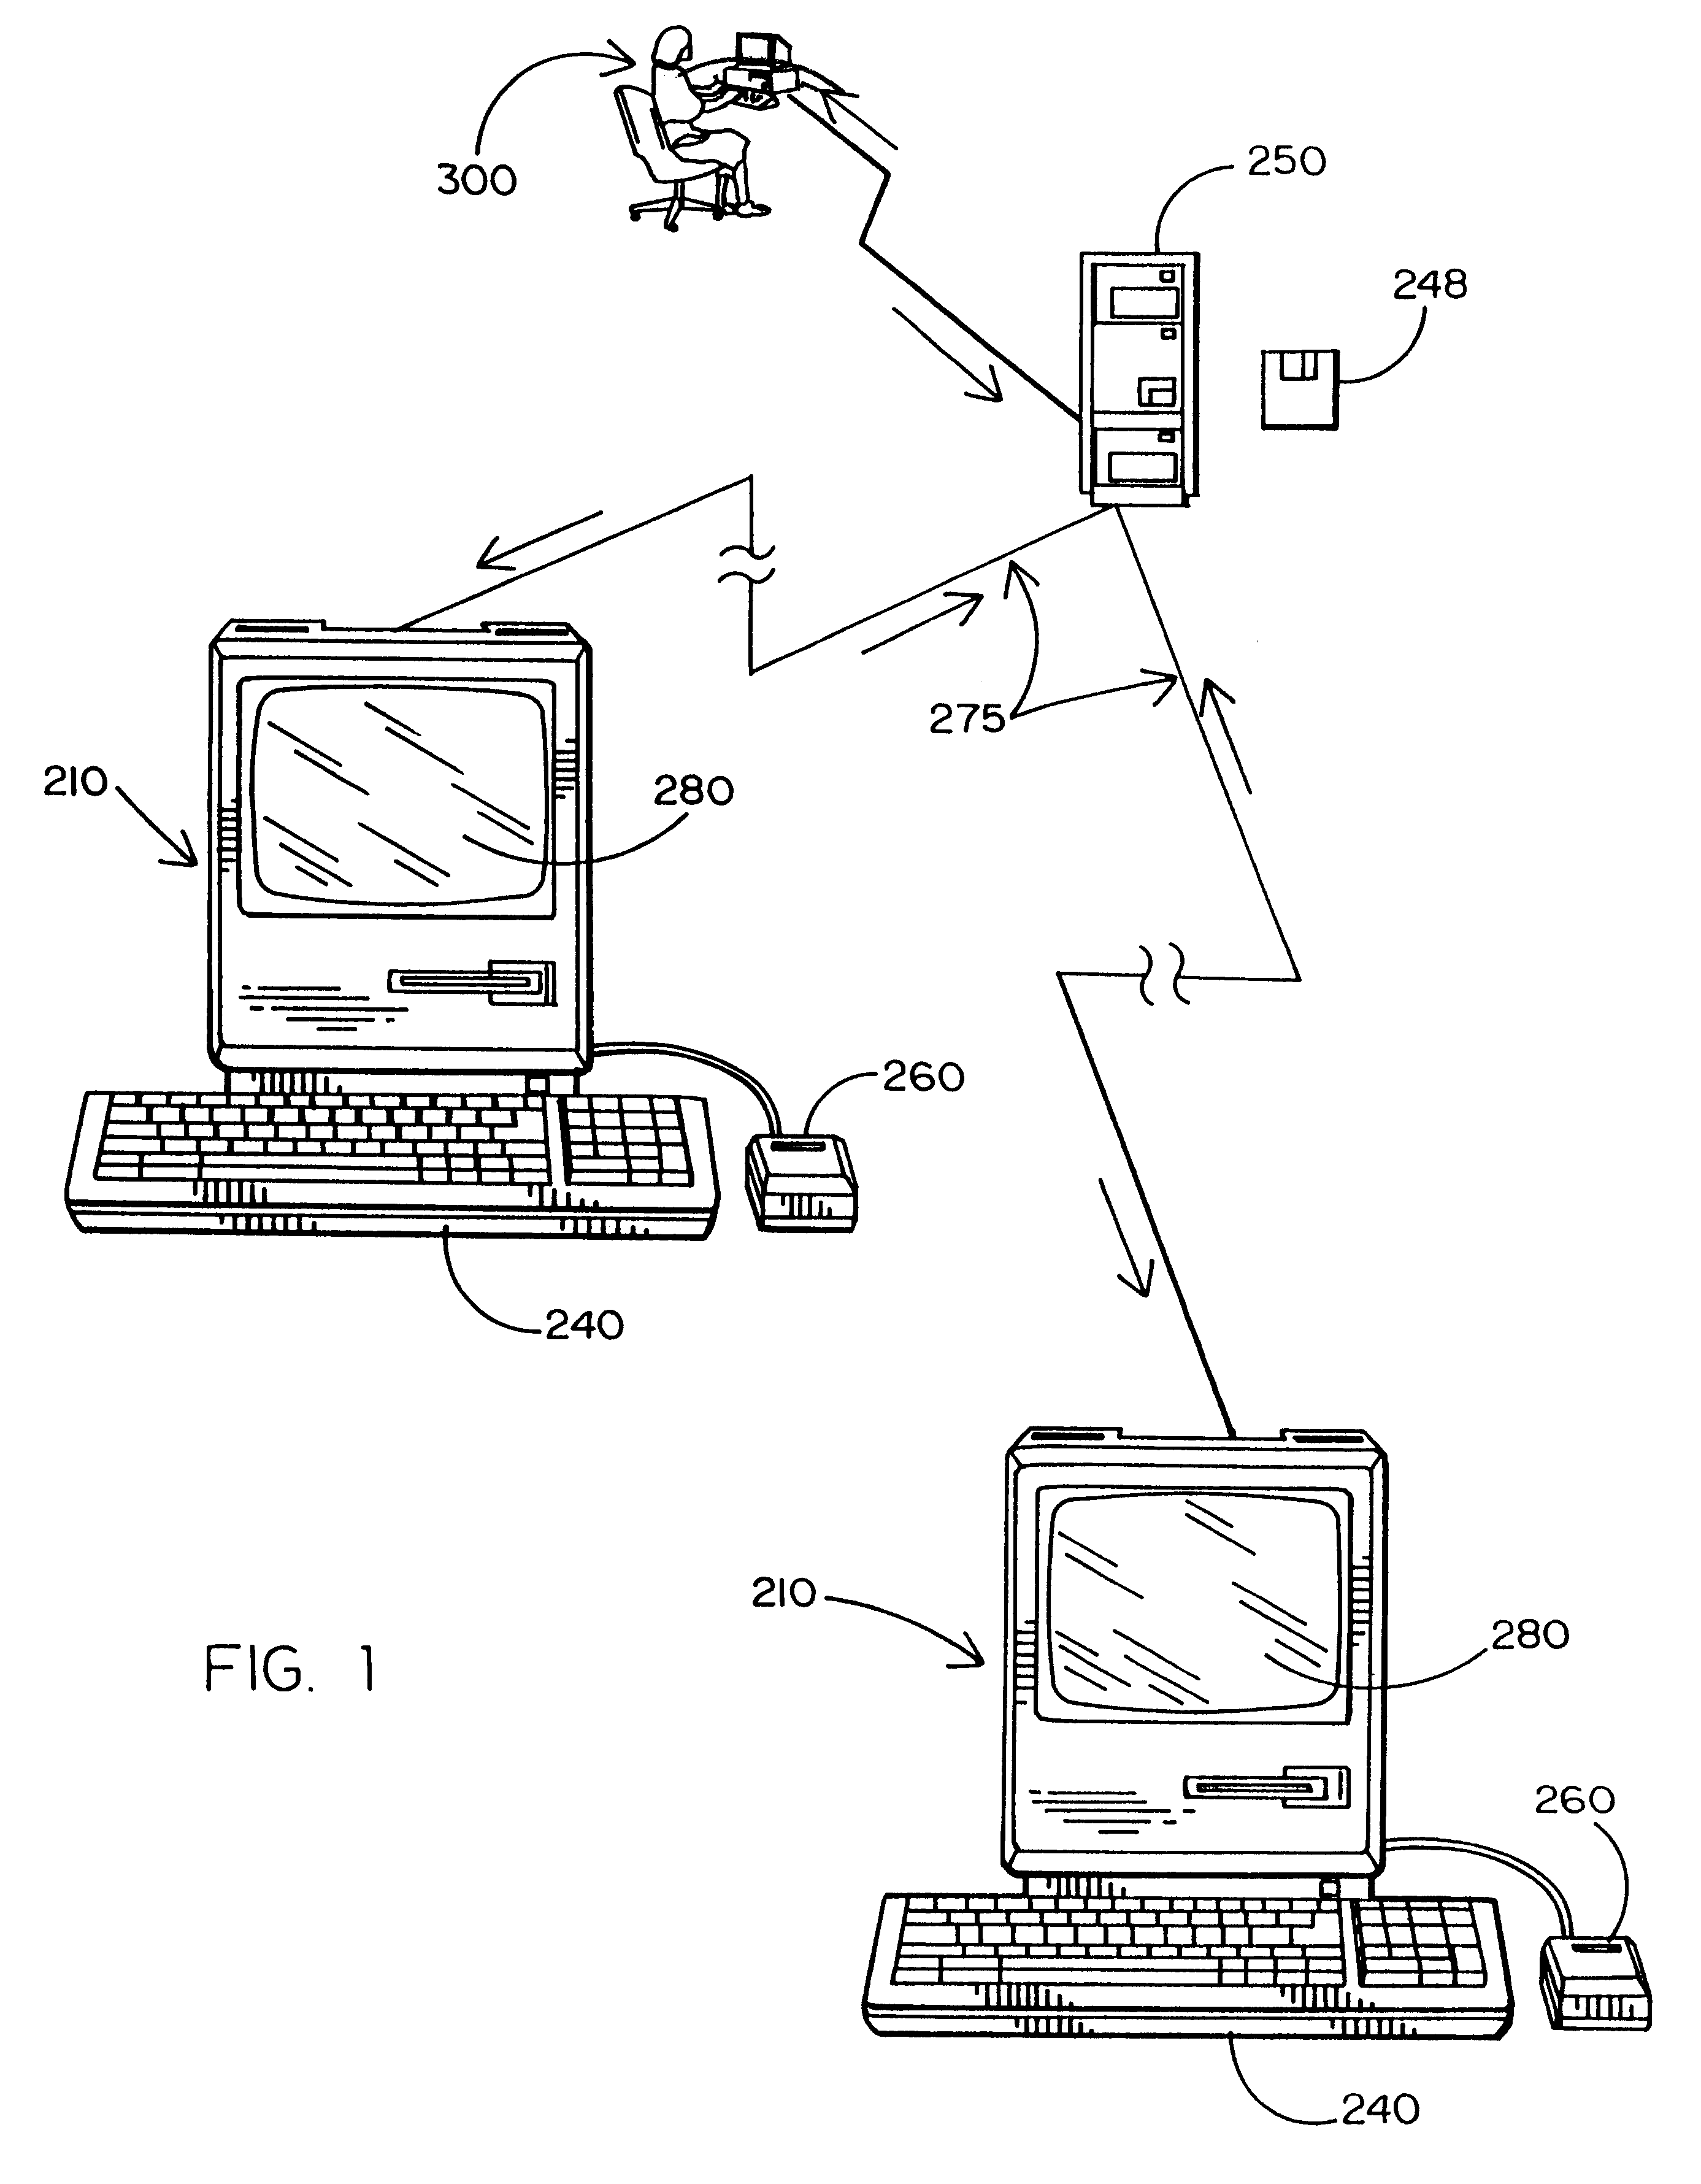 Method and system for processing and transmitting electronic auction information